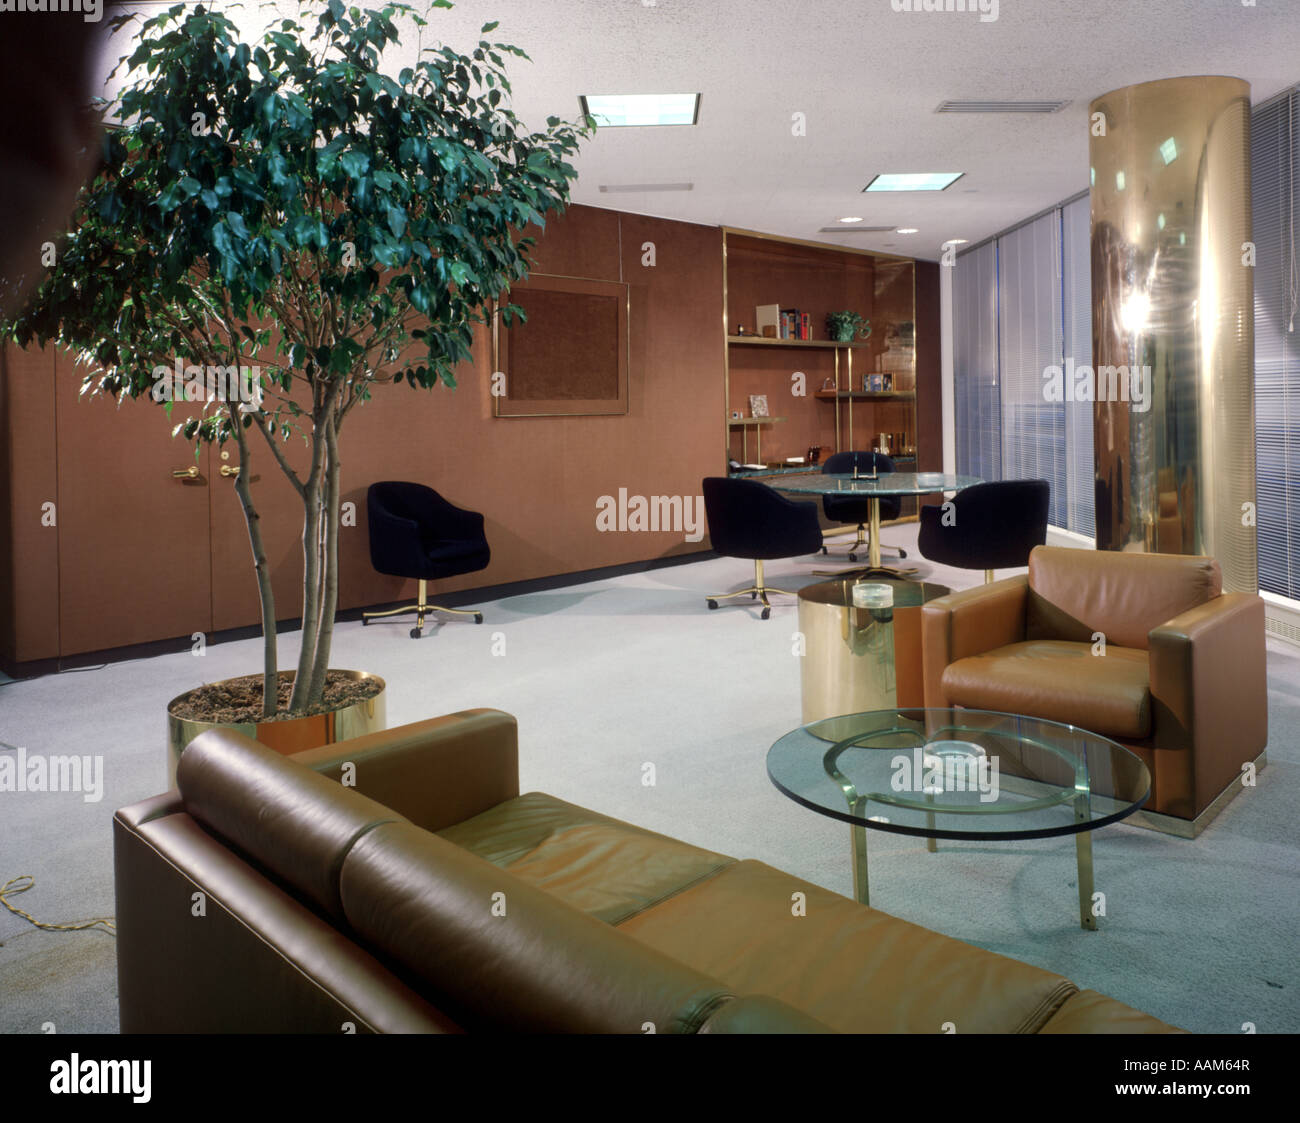 1970 197Os 1980 1980s OFFICE INTERIOR LEATHER COUCH SOFA BROWN GLASS COFFEE TABLE OFFICES FURNITURE HOUSE PLANT Stock Photo